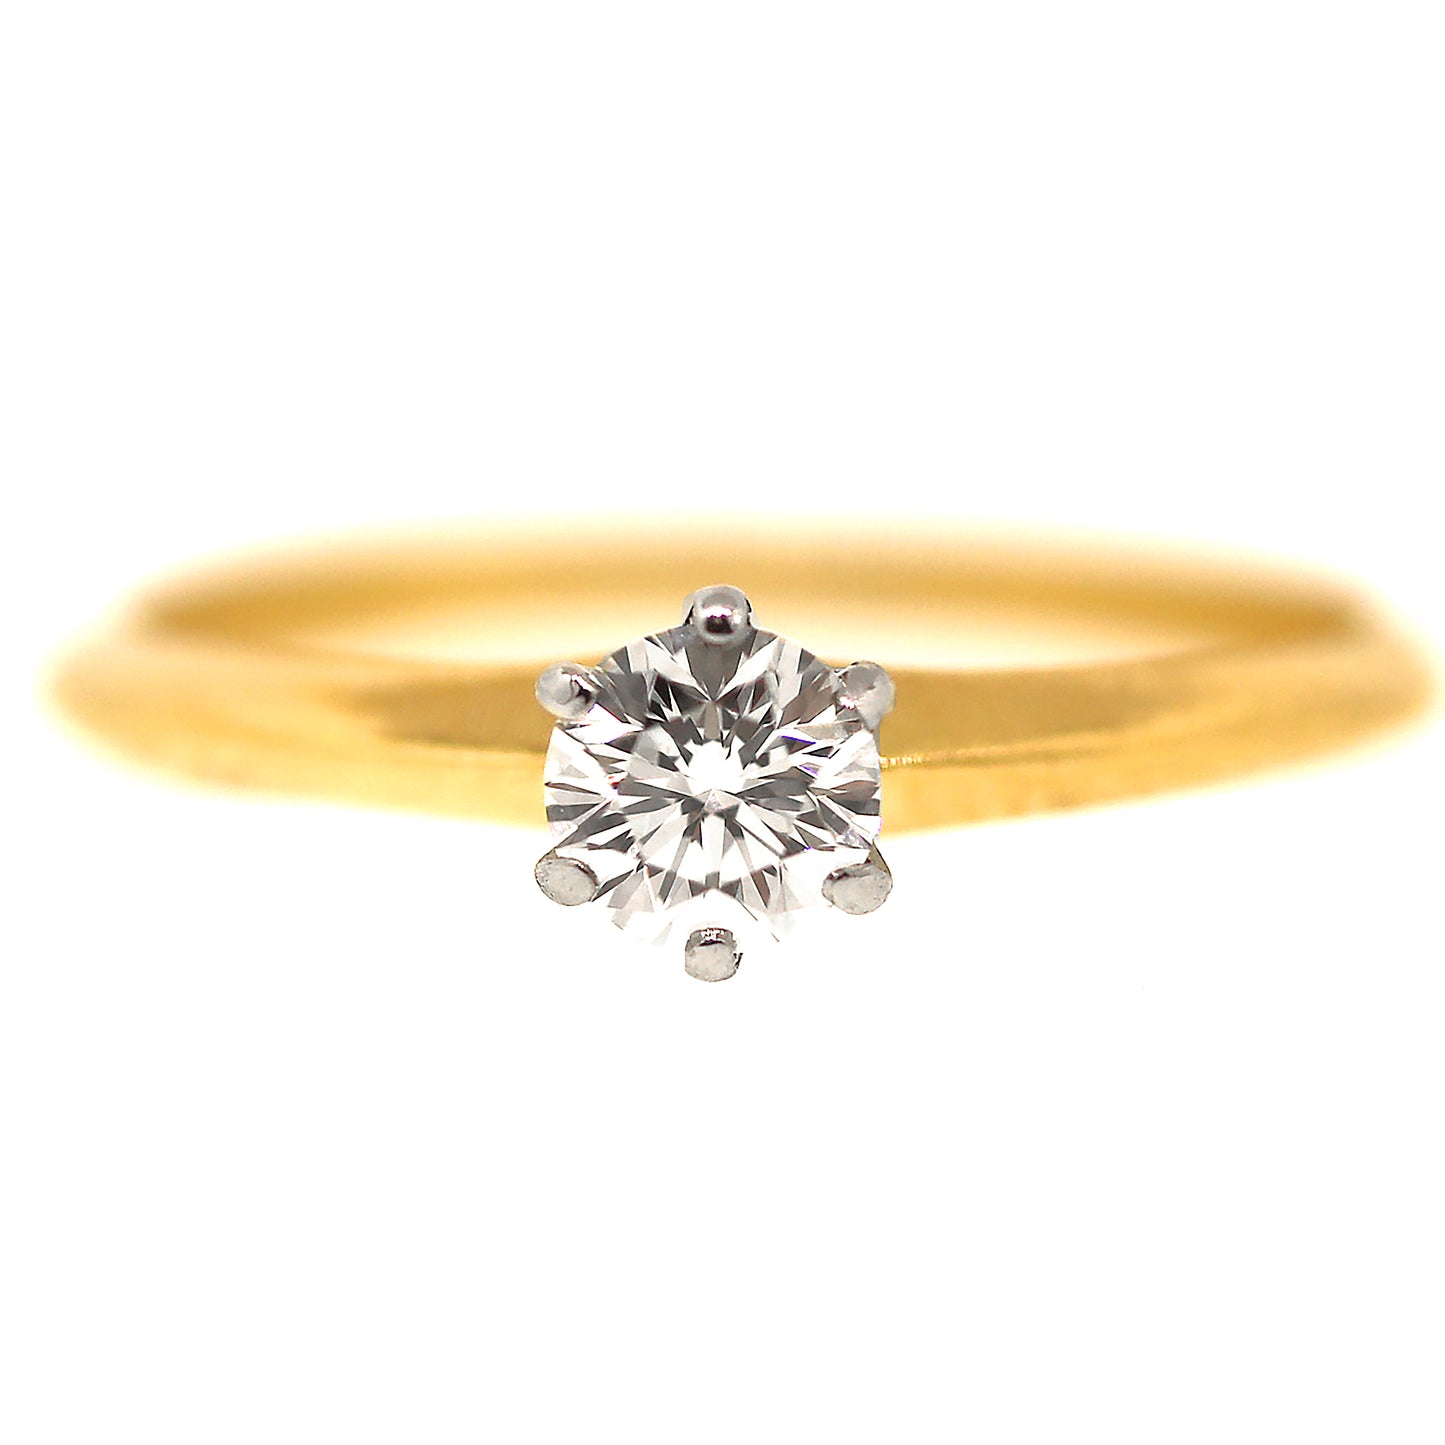 Tiffany and Co. Engagement Diamond Ring